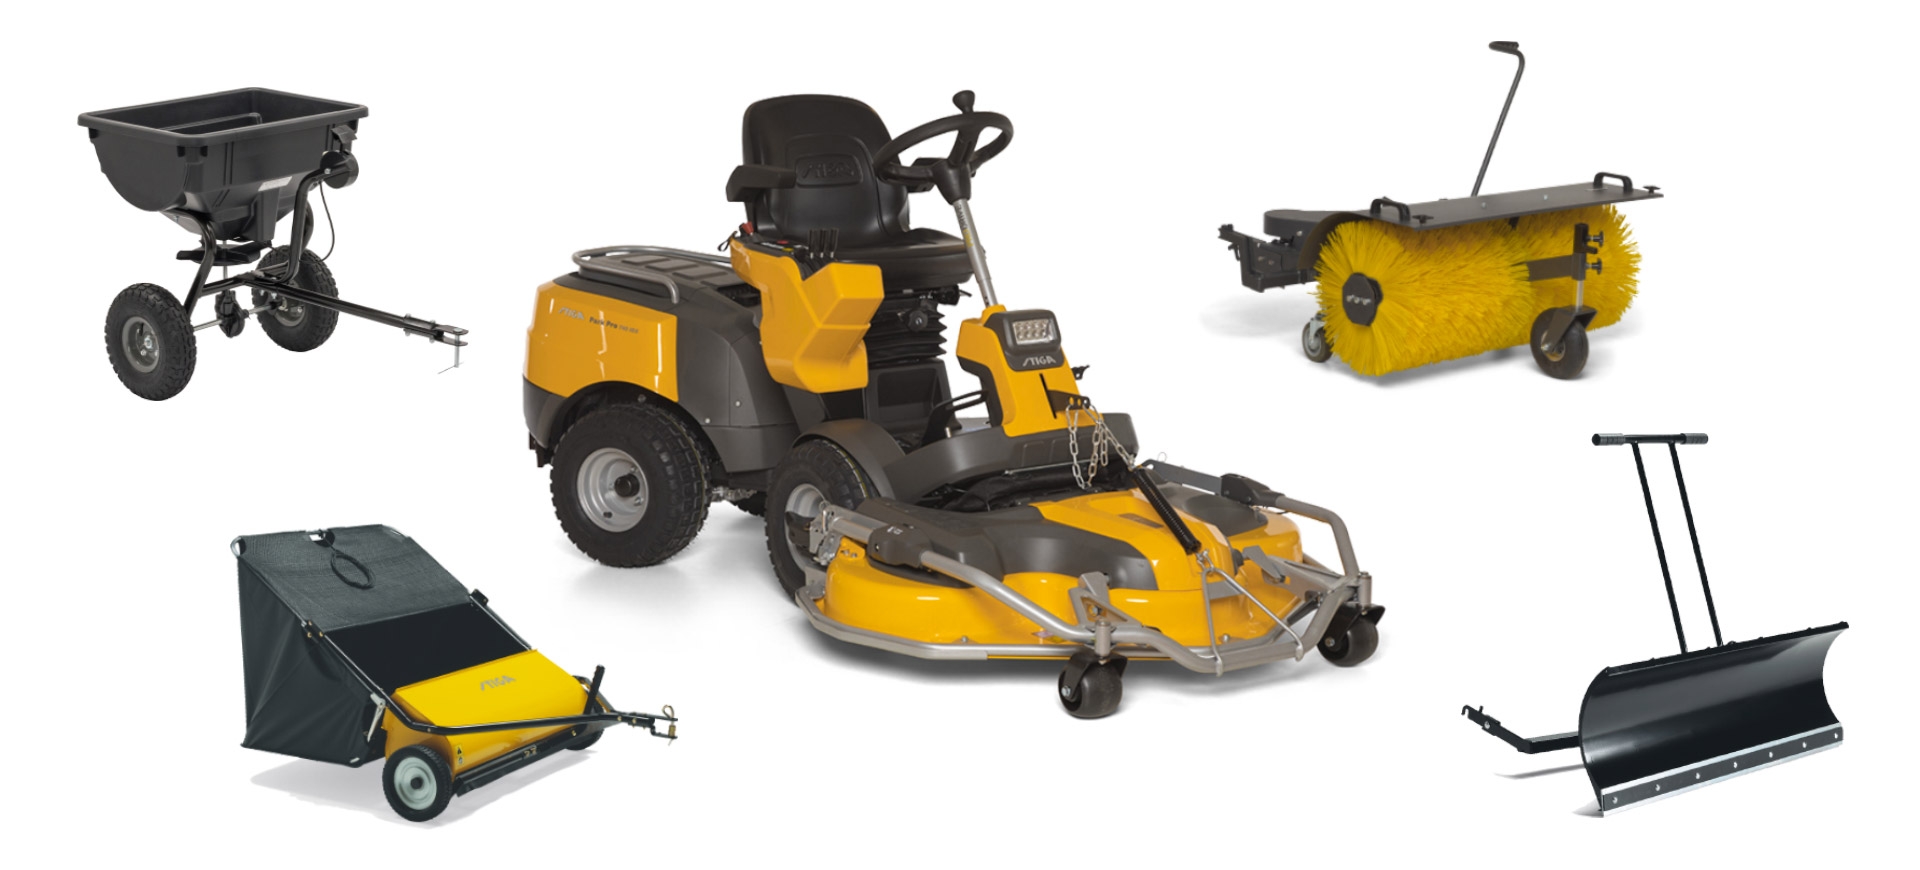 Ride On Mower Attachments - Shanley Mowers